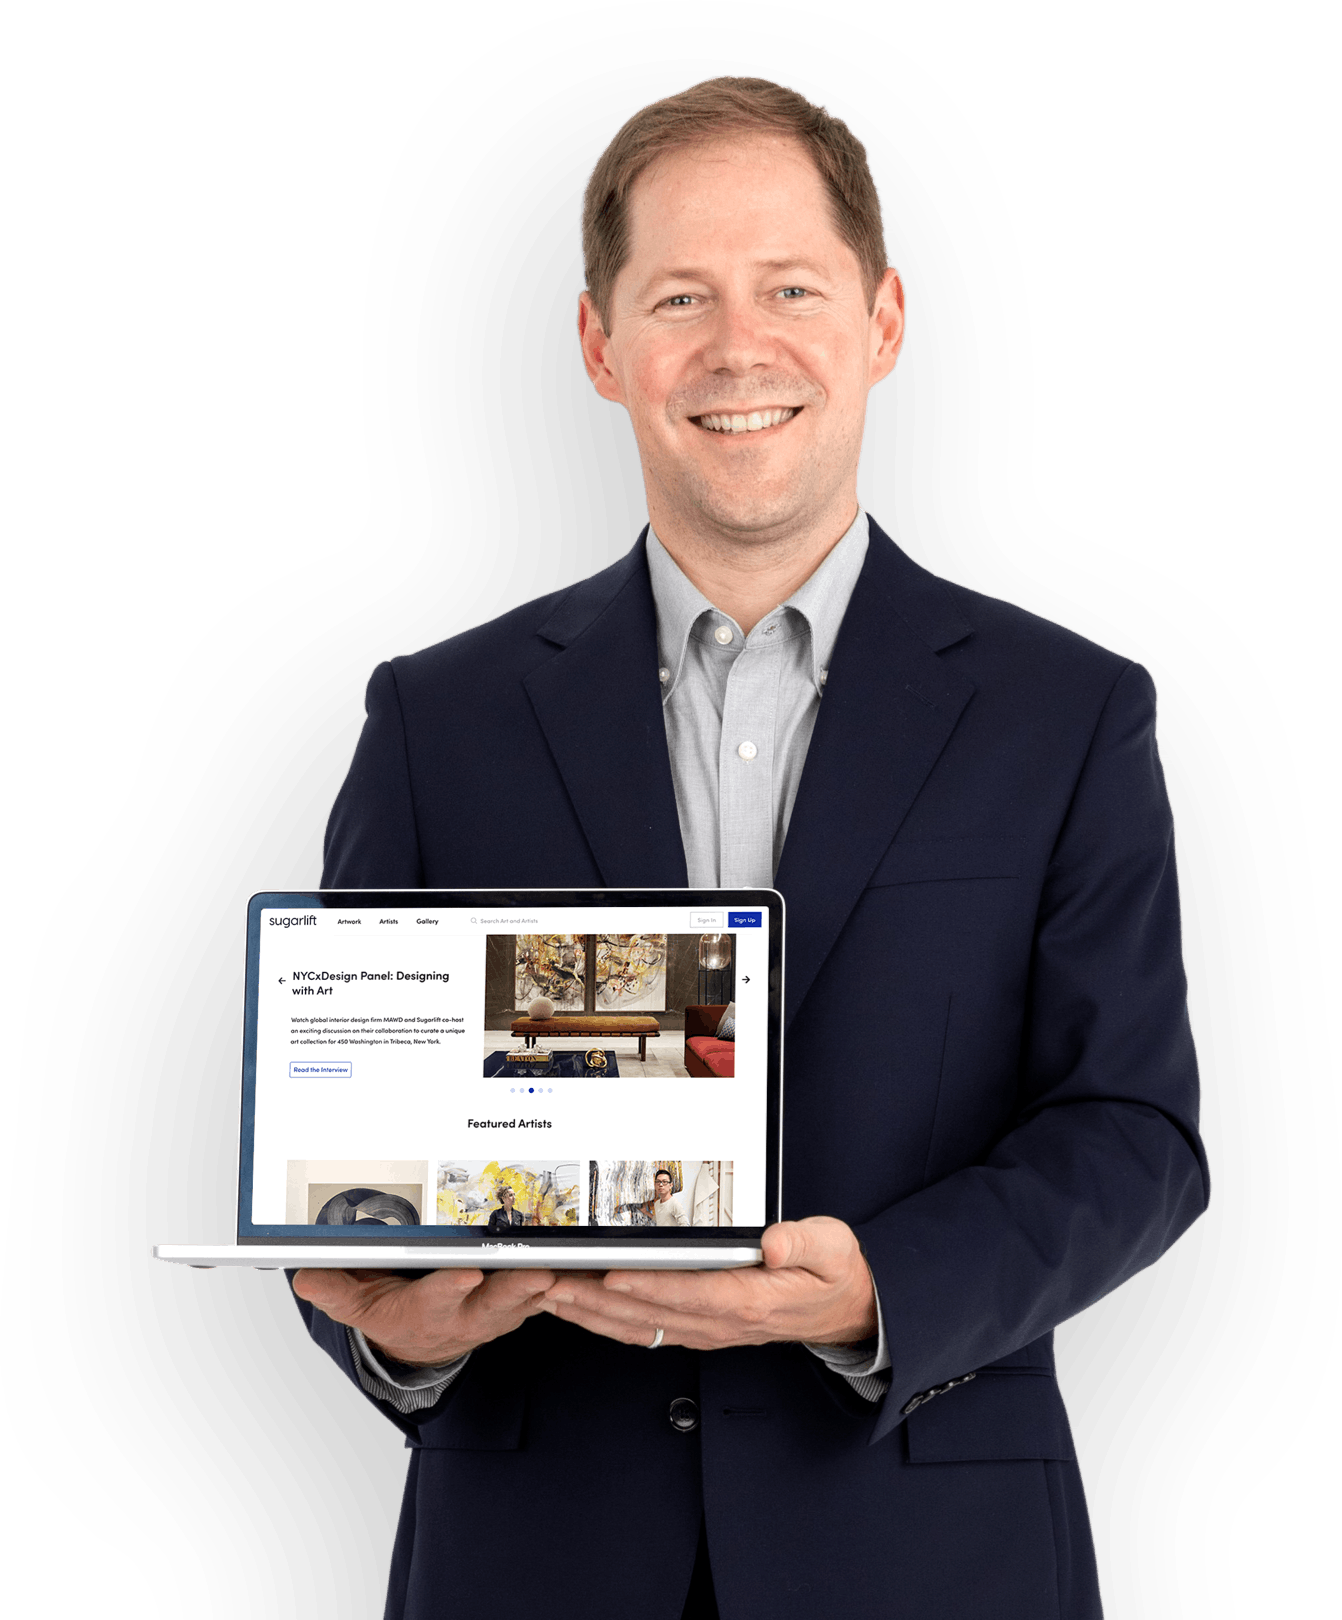 Sugarlift founder Wright smiling, holding a laptop facing the camera. The laptop is open on the Sugarlift landing page.